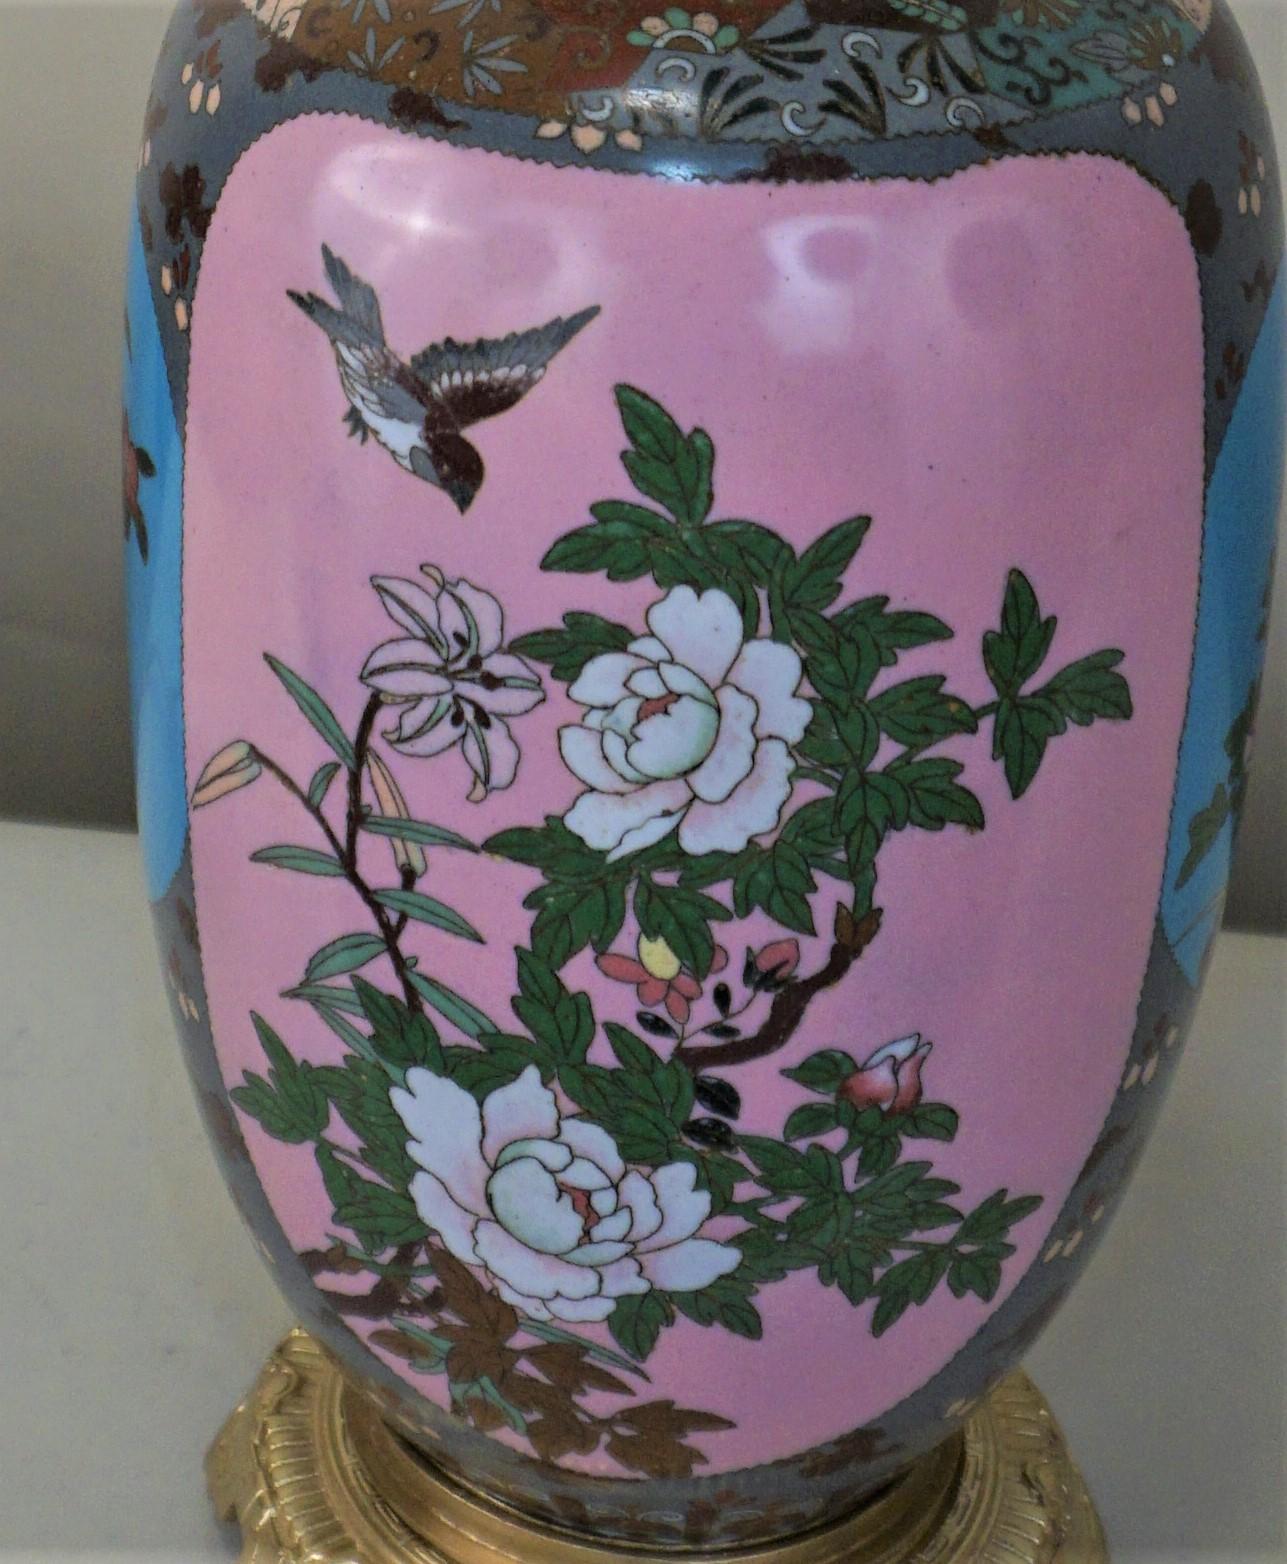 A 19th century cloisonné enamel vase oil lamp decorated with two panels enclosing either a bird and flower and bronze mounting hardware.
Electrified with one 3 way socket and fitted with handmade silk lampshade.
Total height including the shade is